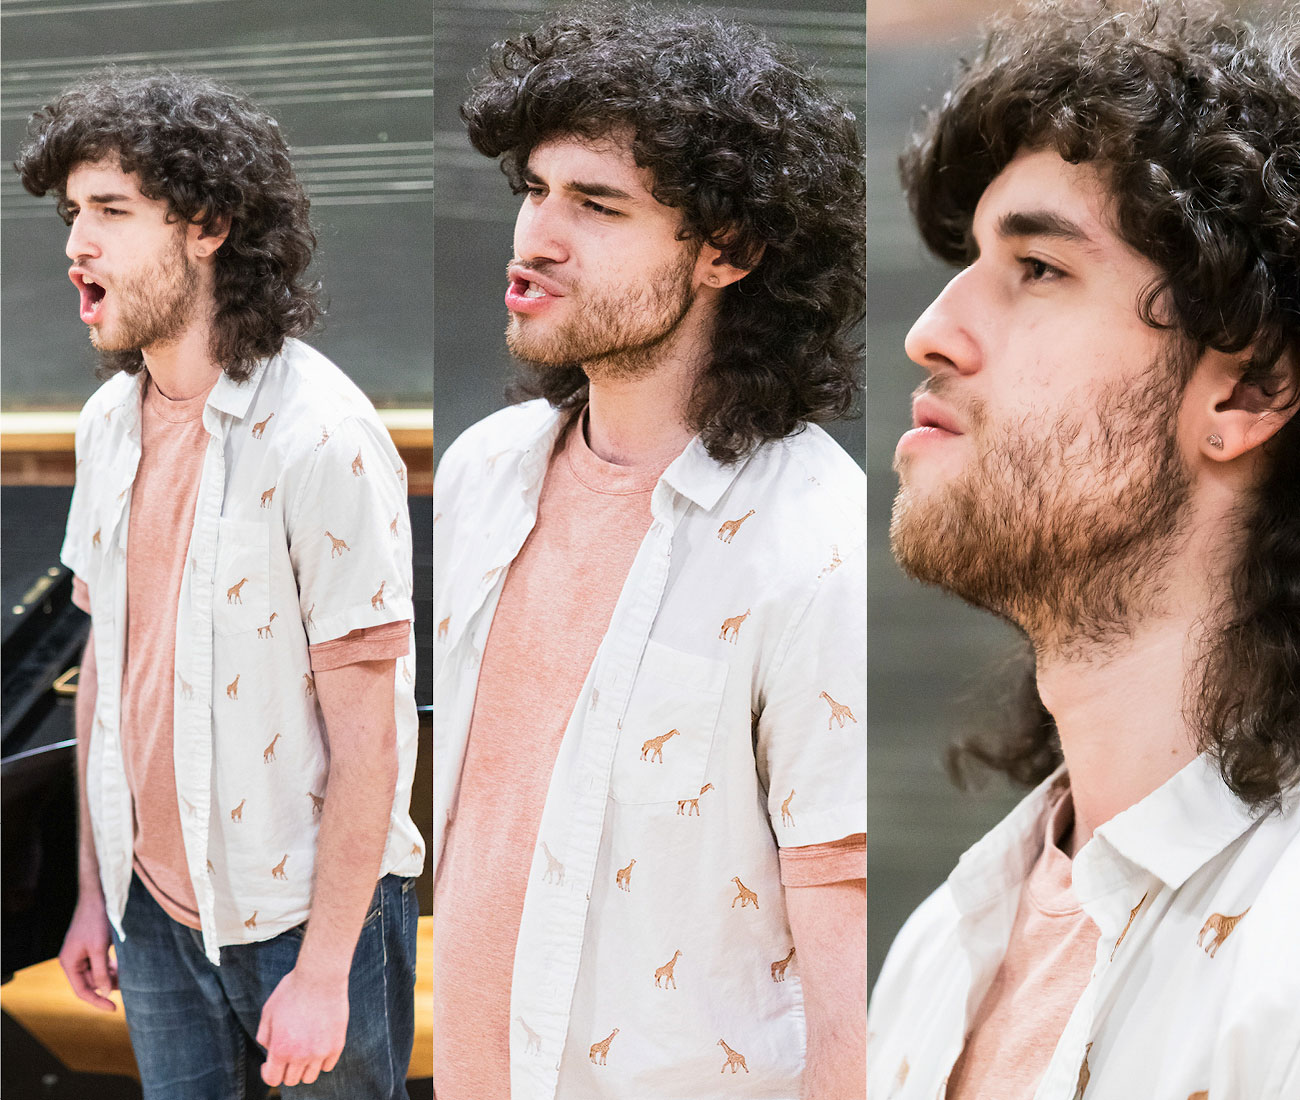 Three images of a young man with long curly dark hair singing.